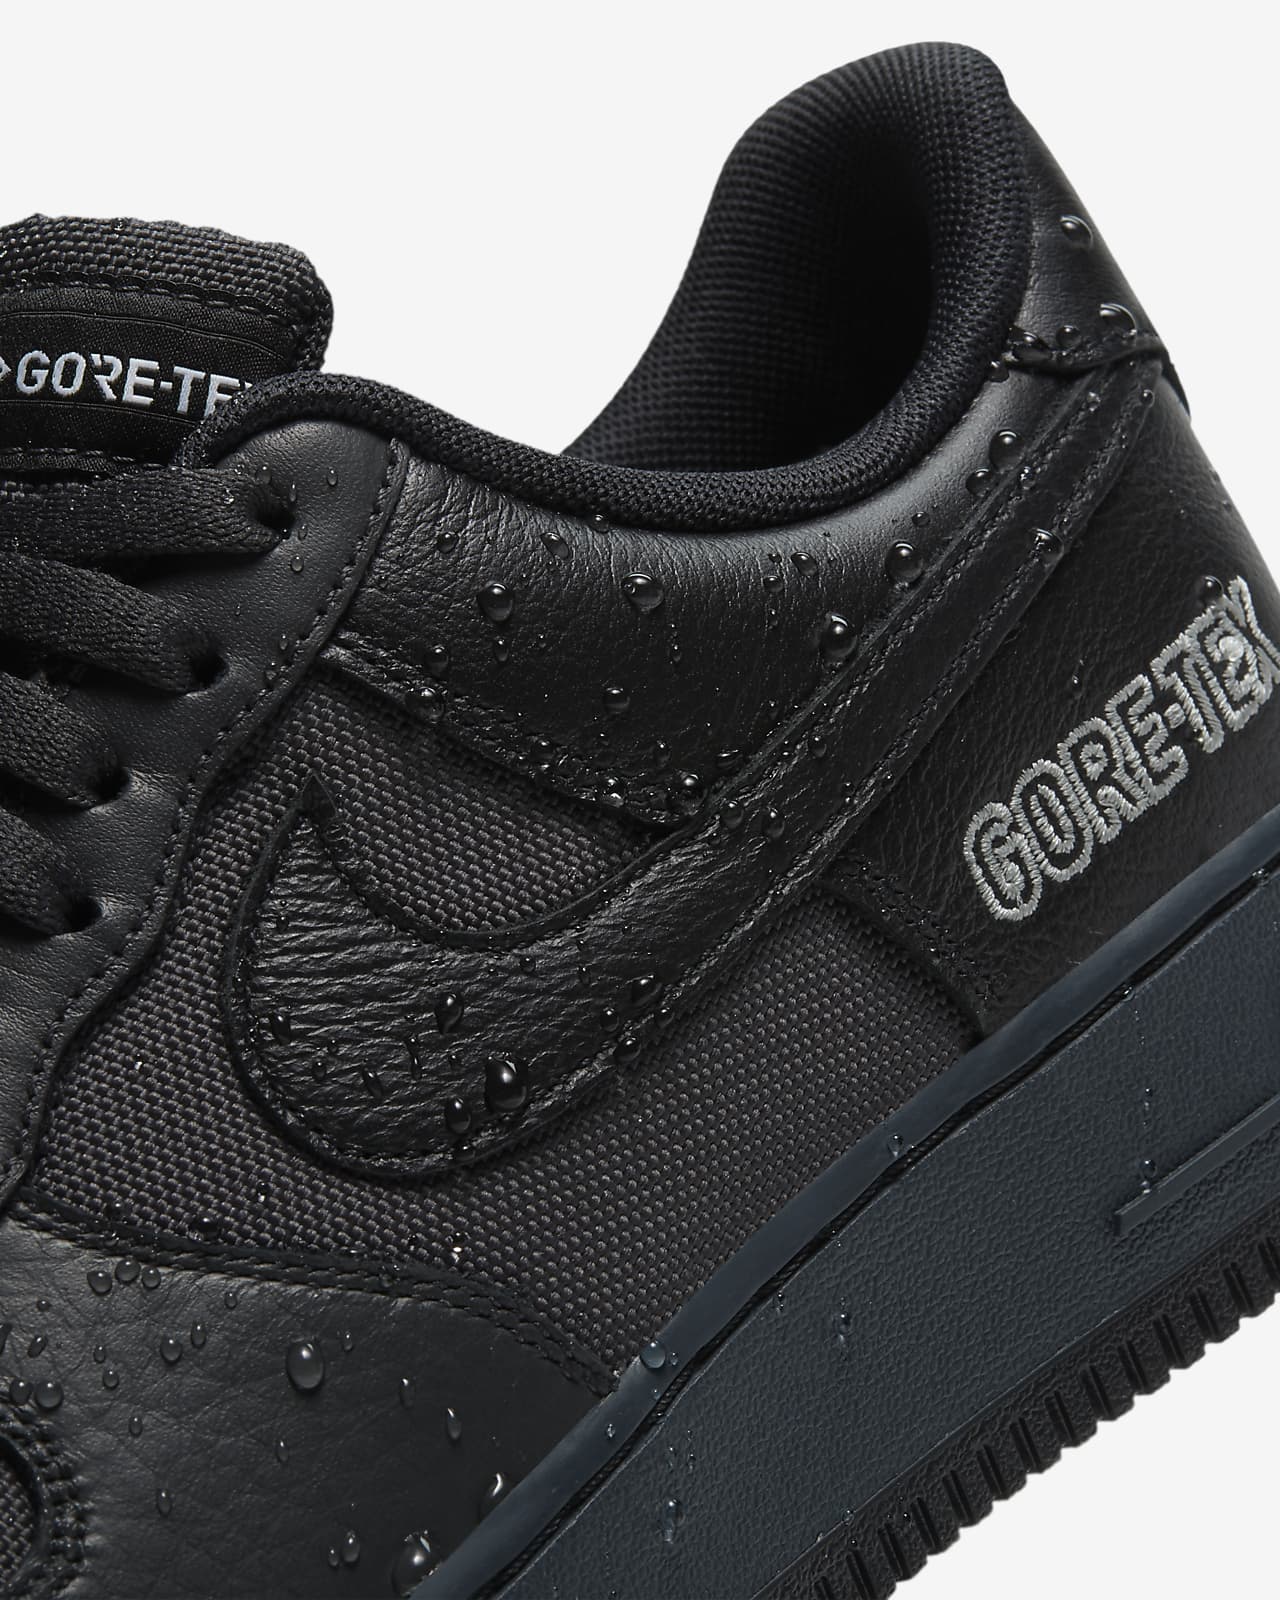 nike air force 1 07 winter anthracite